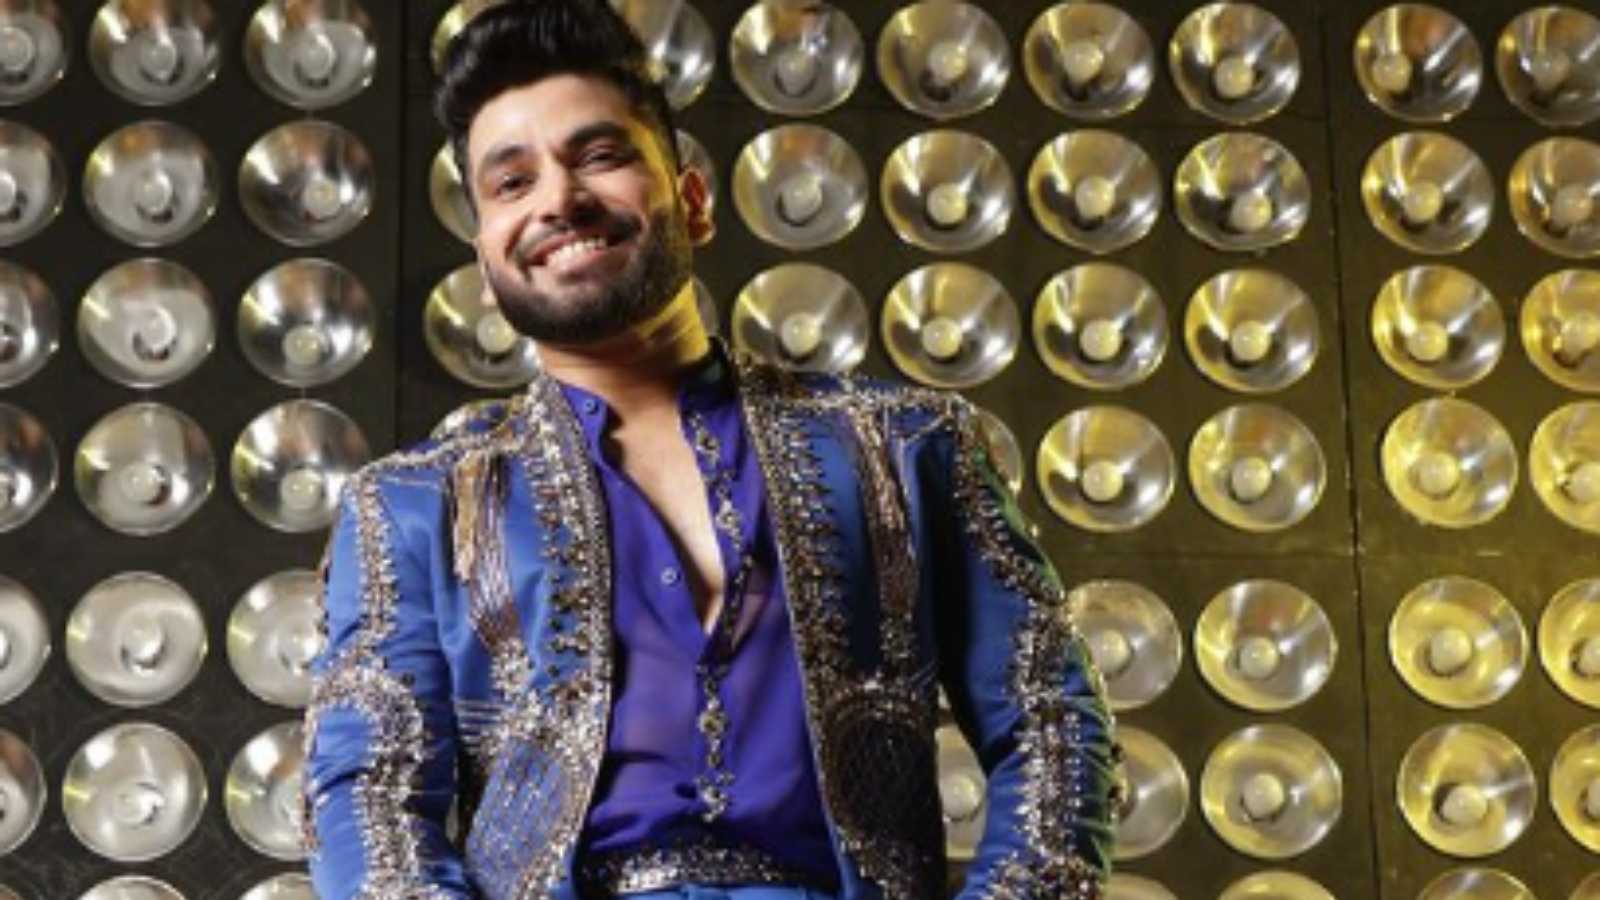 'Demotivate mat hona': Shiv Thakare's fans call out Jhalak Dikhhla Jaa 11 makers for being biased after latest episode